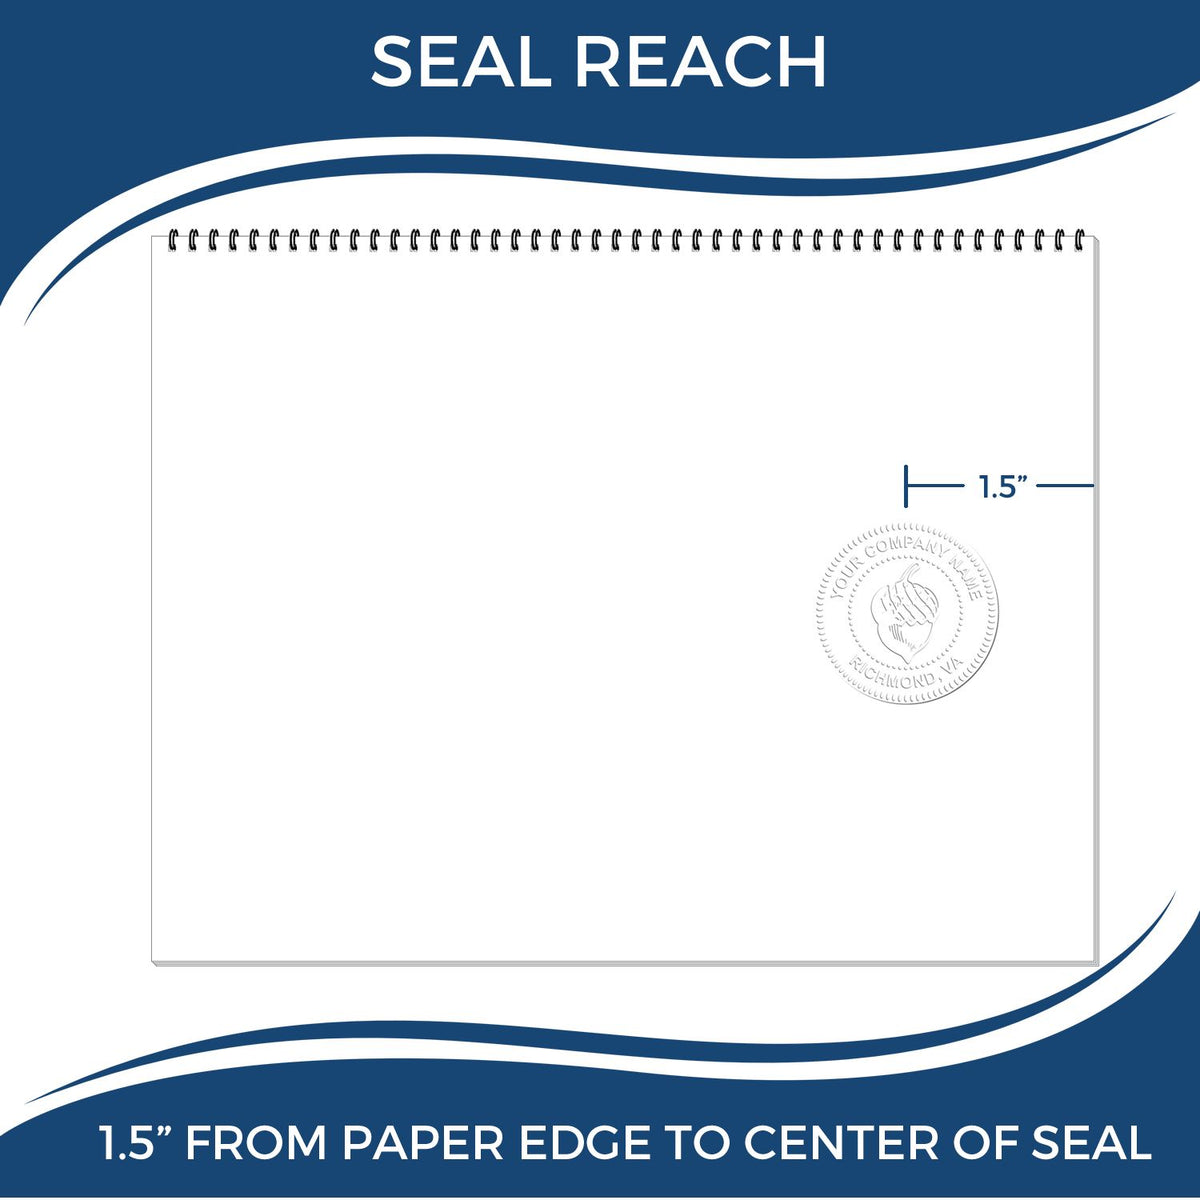 An infographic showing the seal reach which is represented by a ruler and a miniature seal image of the Handheld Tennessee Architect Seal Embosser